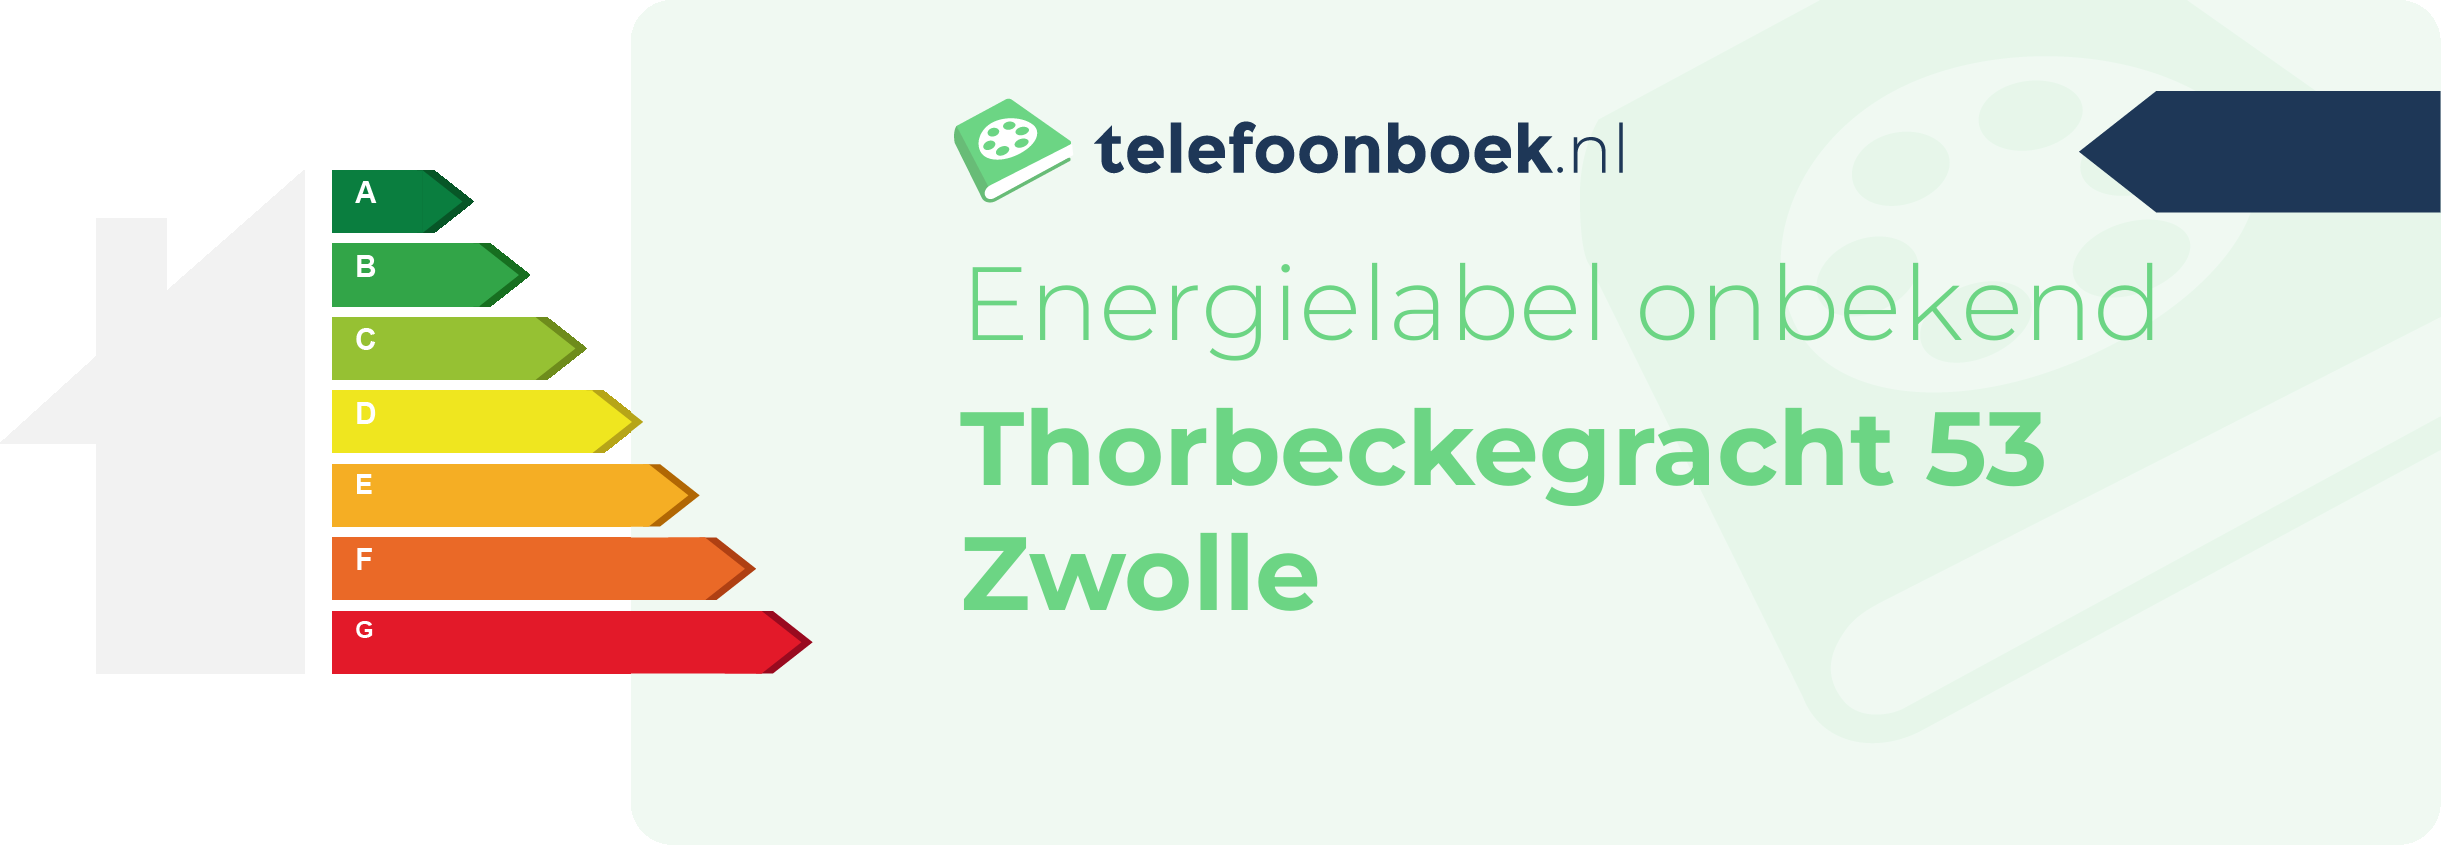 Energielabel Thorbeckegracht 53 Zwolle